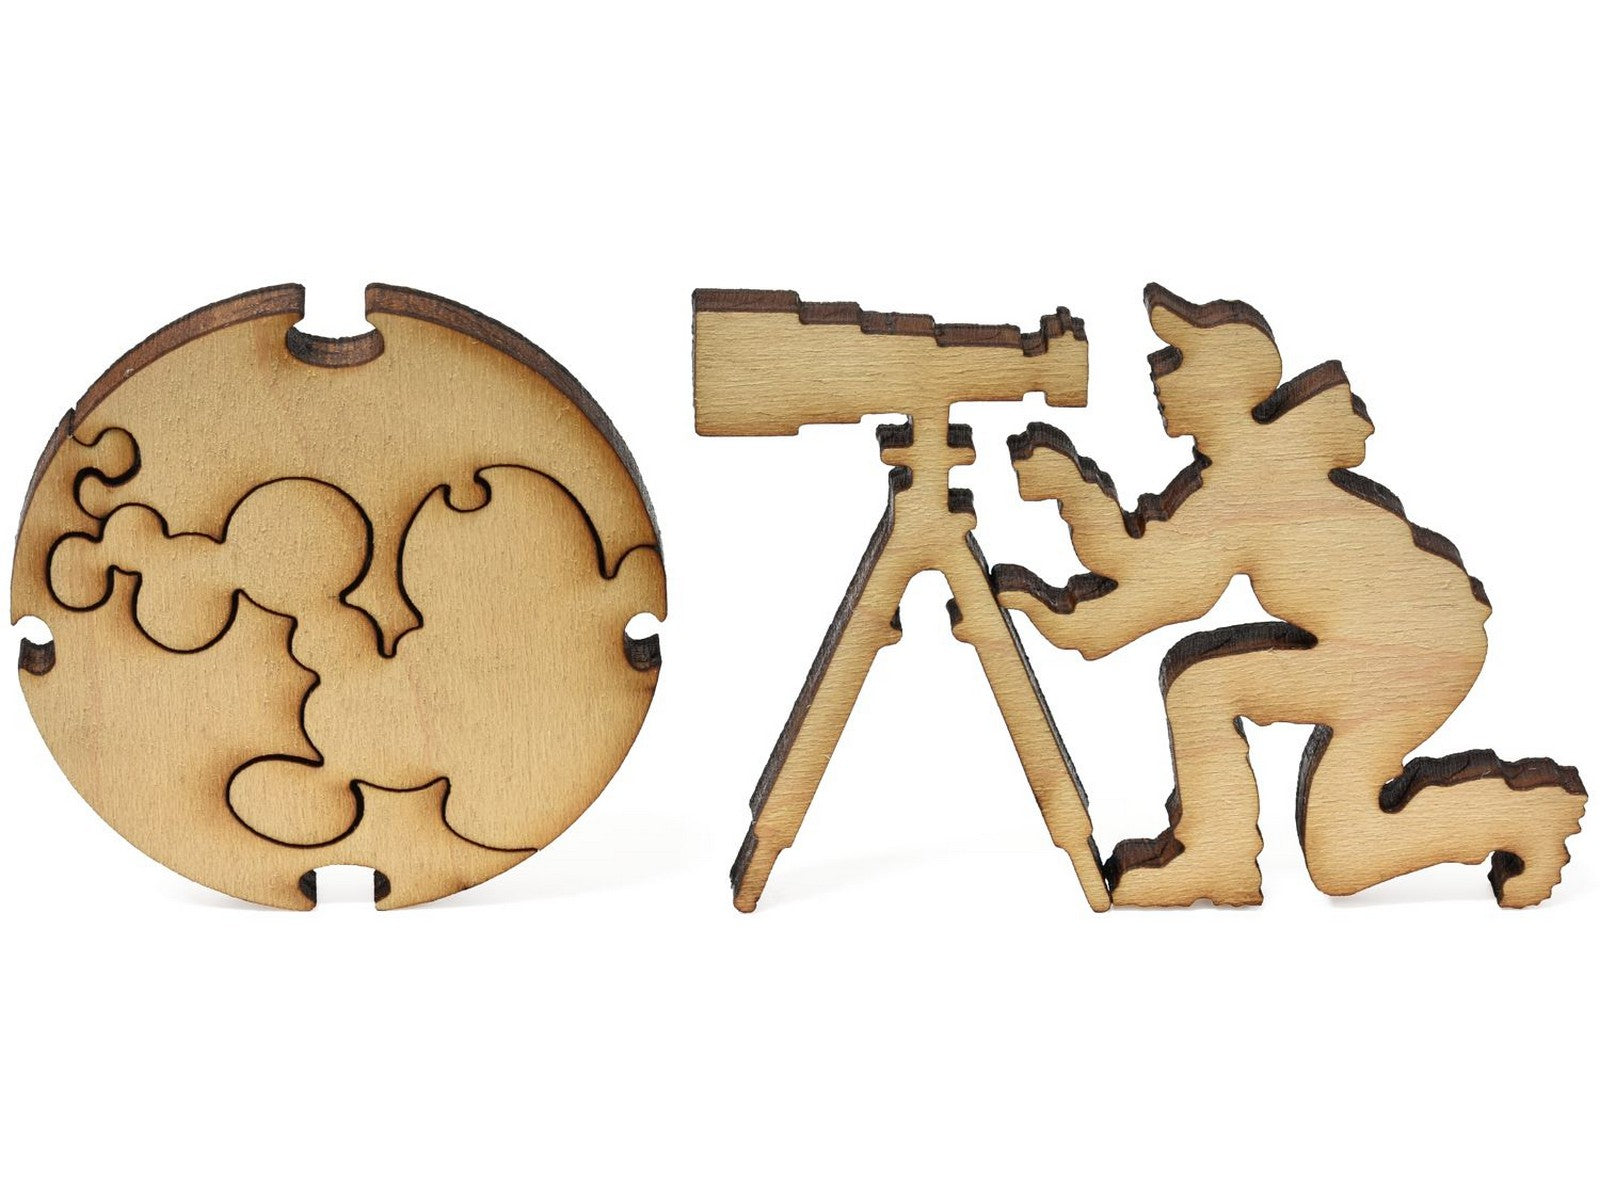 A closeup of pieces showing an astronomer with a telescope and a planet.